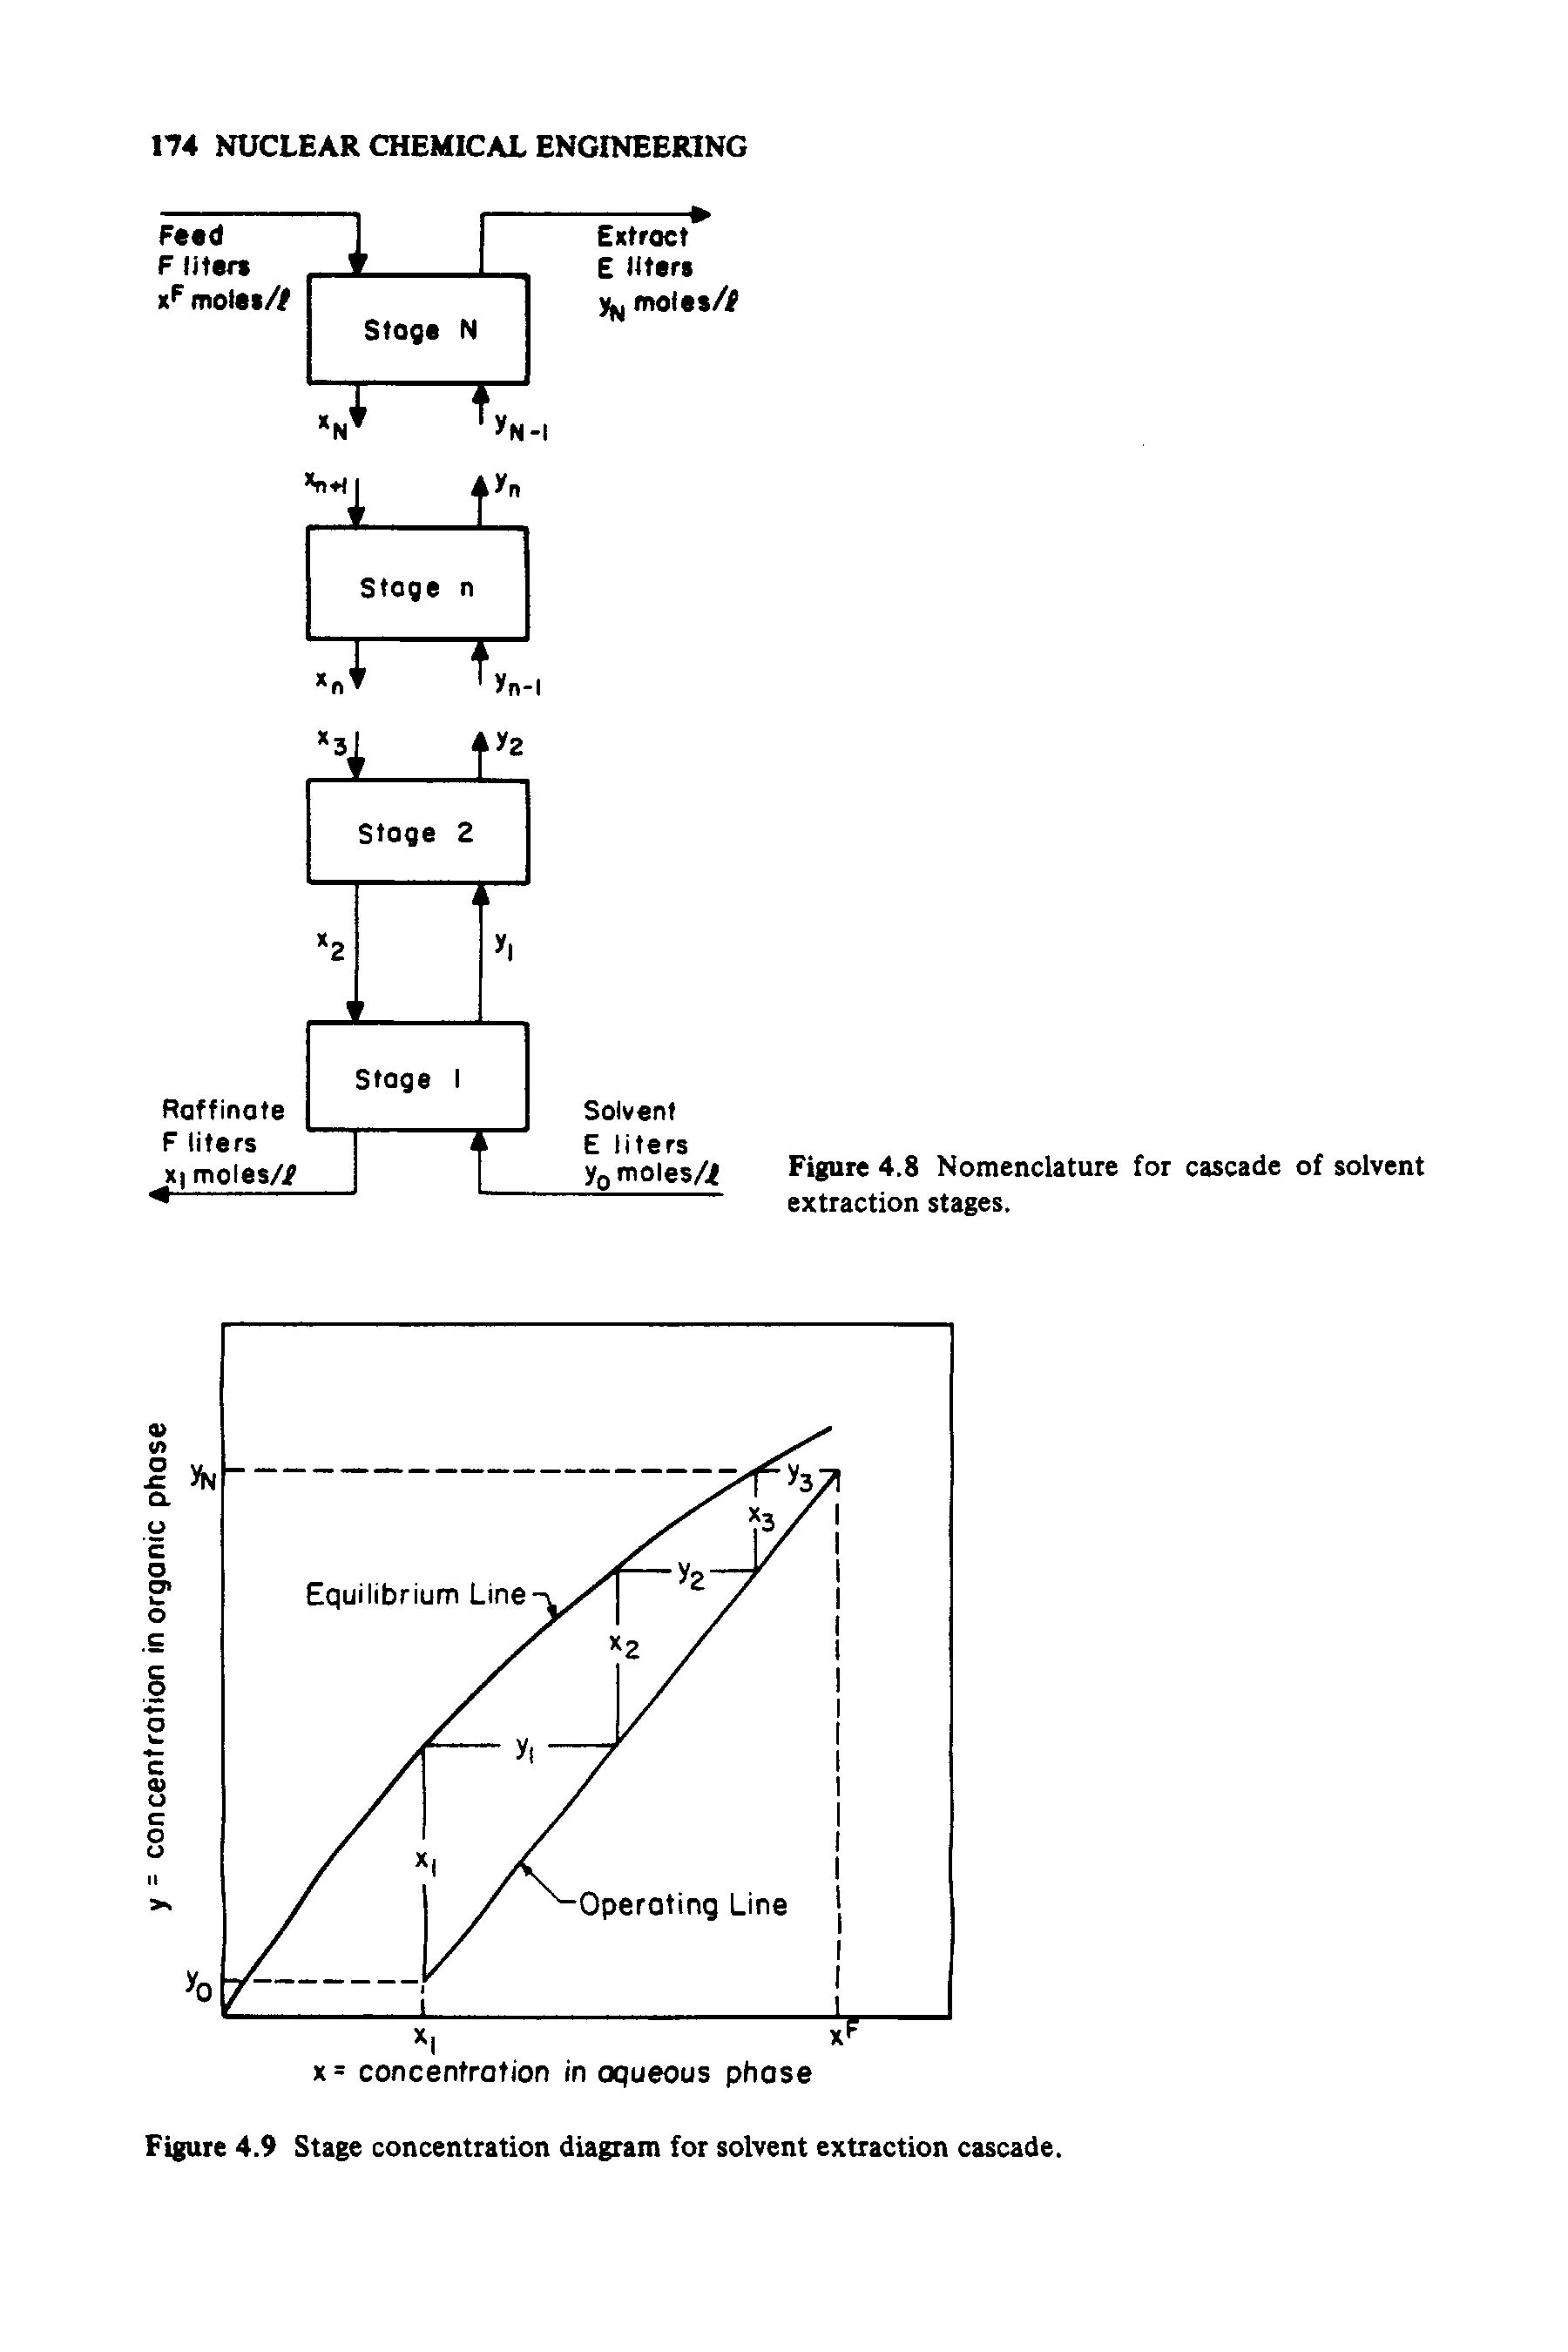 Figure 4.9 Stage concentration diagram for solvent extraction cascade.